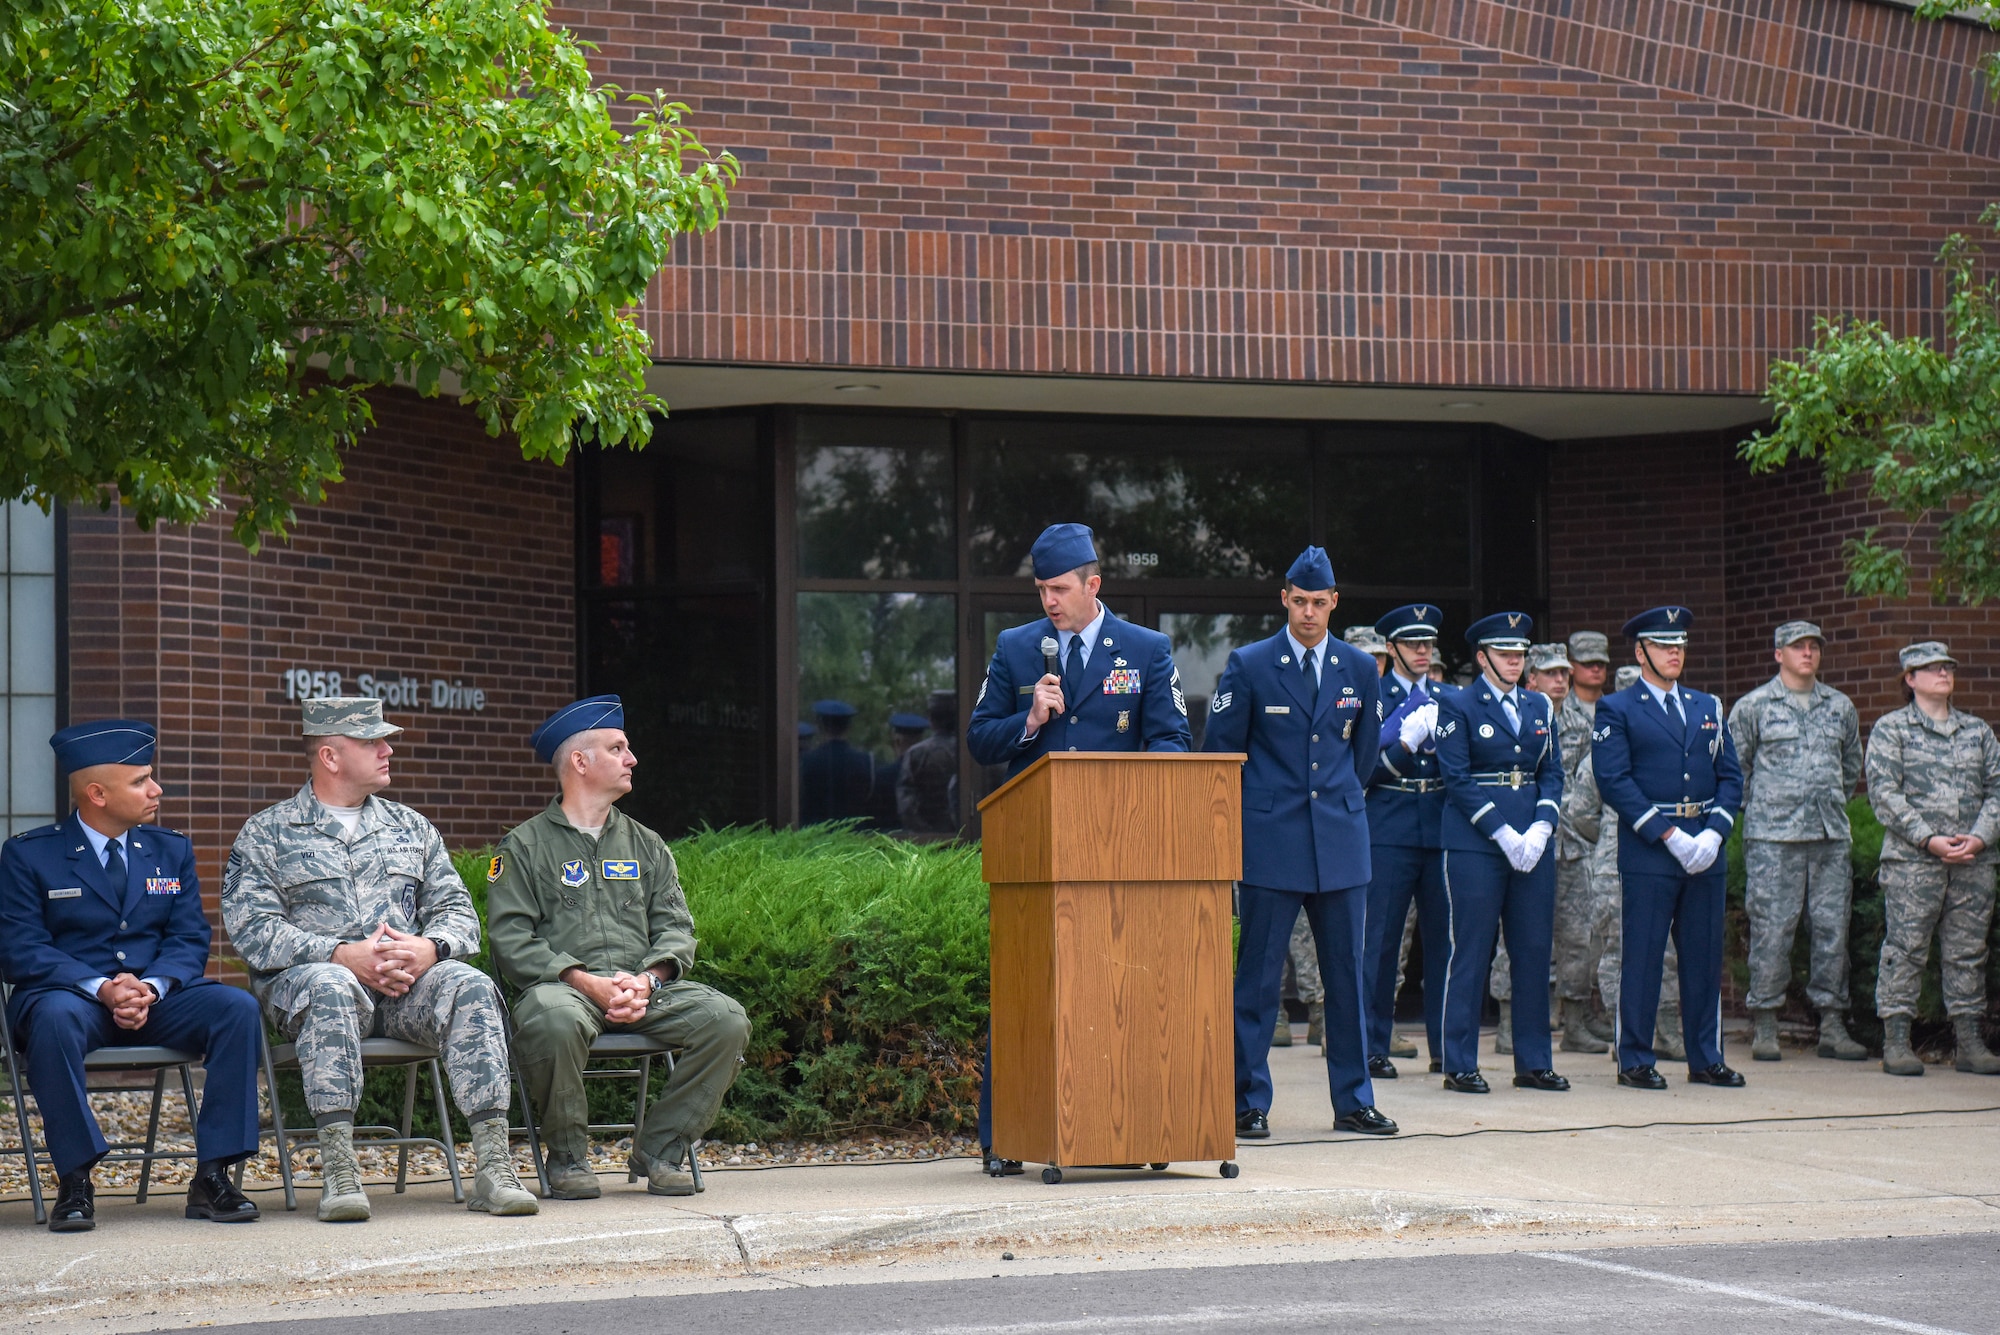 Senior Master Sgt. Zachary Townsend, the 28th Civil Engineer Squadron deputy fire chief, addresses the audience during a 9/11 memorial ceremony outside of the 28th Bomb Wing headquarters at Ellsworth Air Force Base, S.D., Sept. 11, 2018. The memorial ceremony was organized by the 28th CES Fire Department in honor of the nearly 3,000 people that died on Sept. 11, 2001. (U.S. Air Force photo by Airman Christina Bennett)